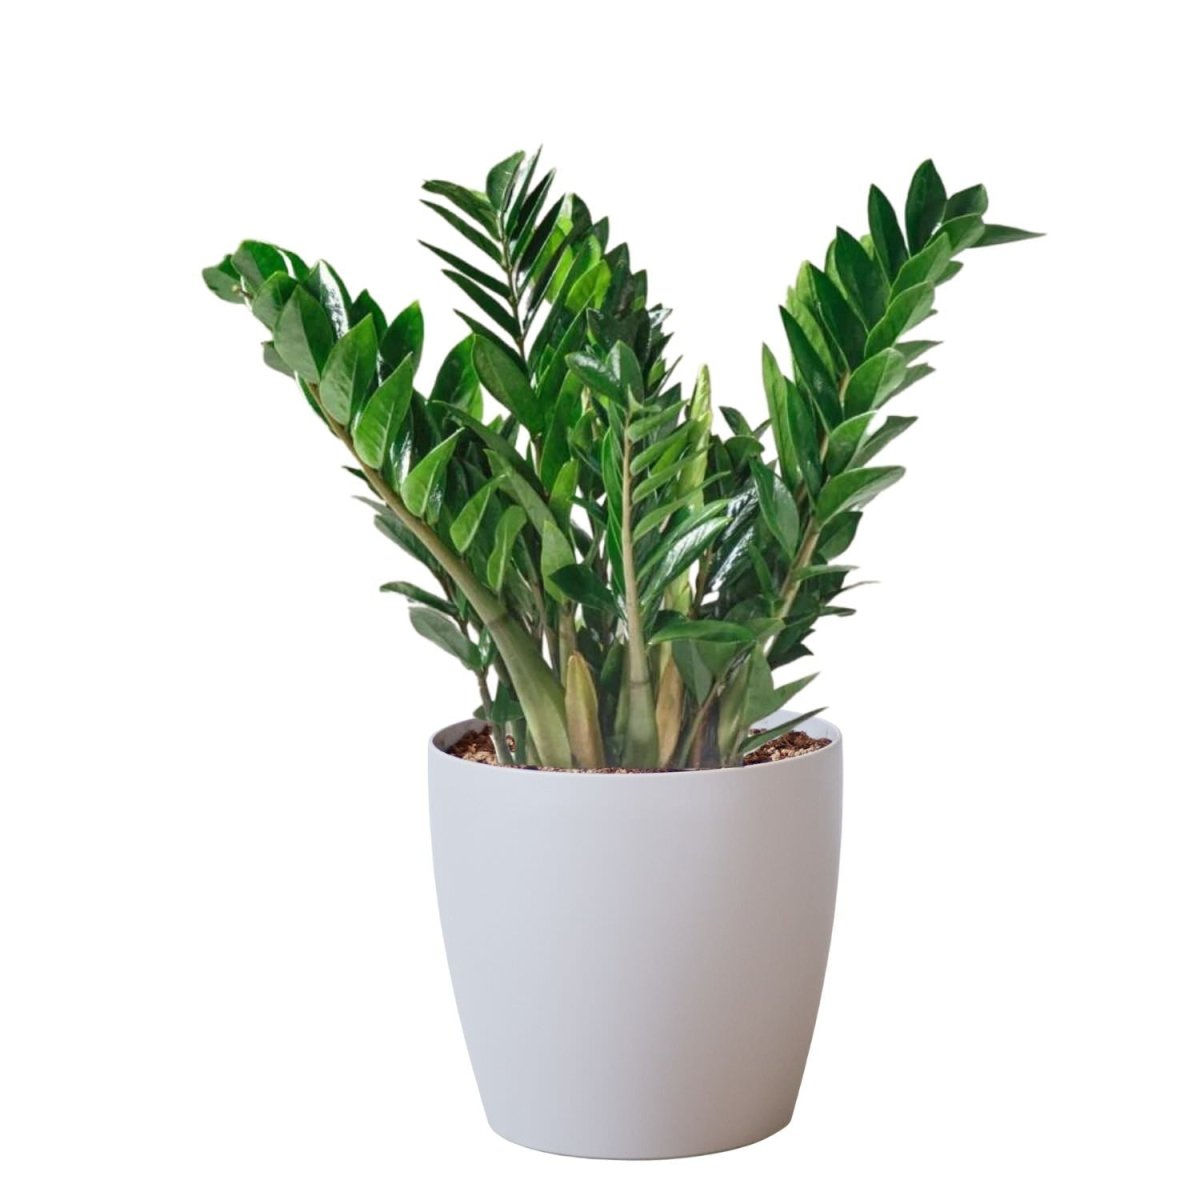 ZZ Plant Potted In Lechuza Classico Trend Planter - Sand Brown - My City Plants